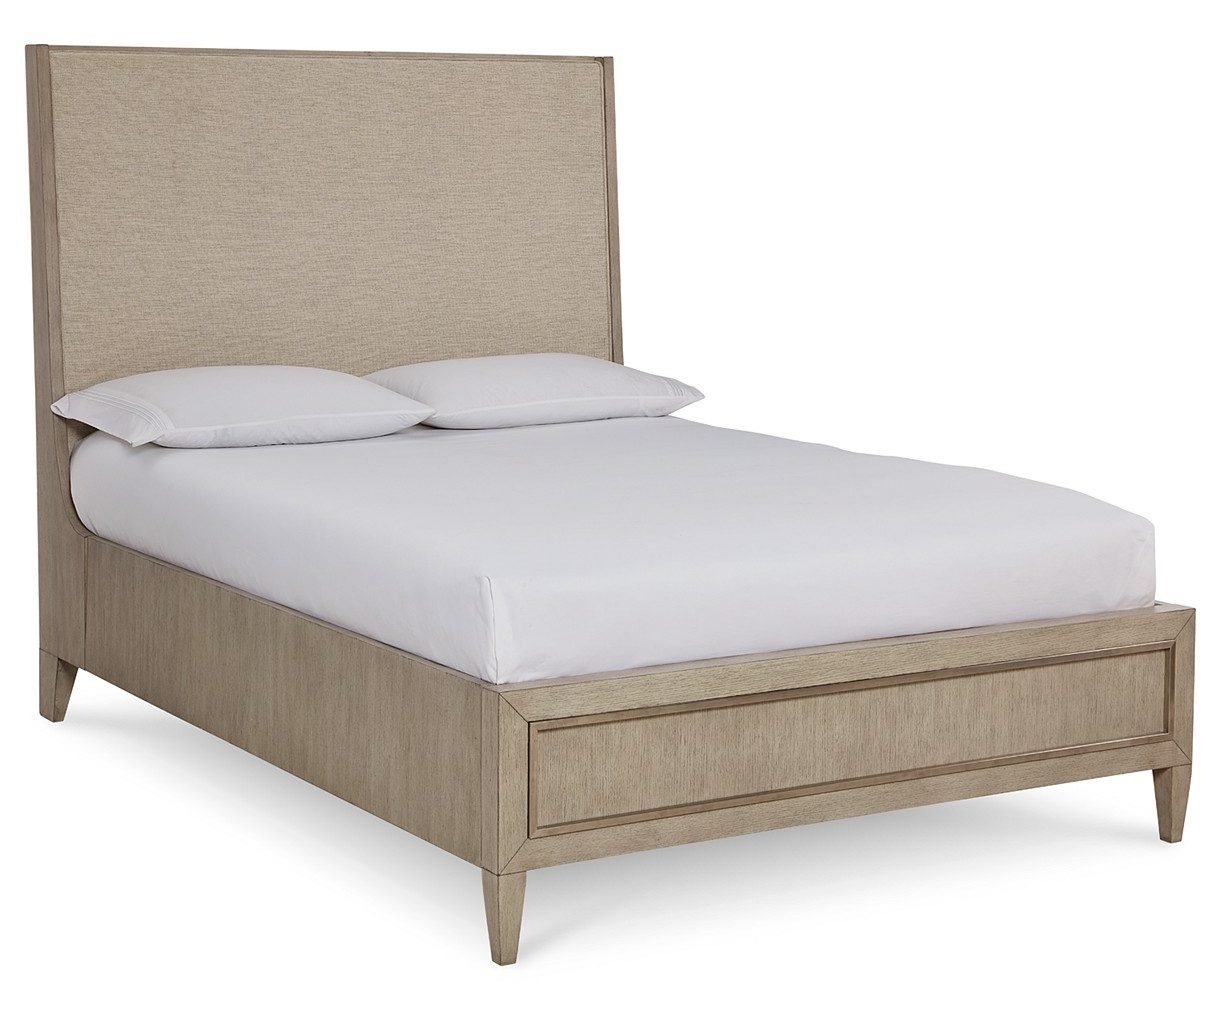 Sutton Place Upholstered Queen Bed